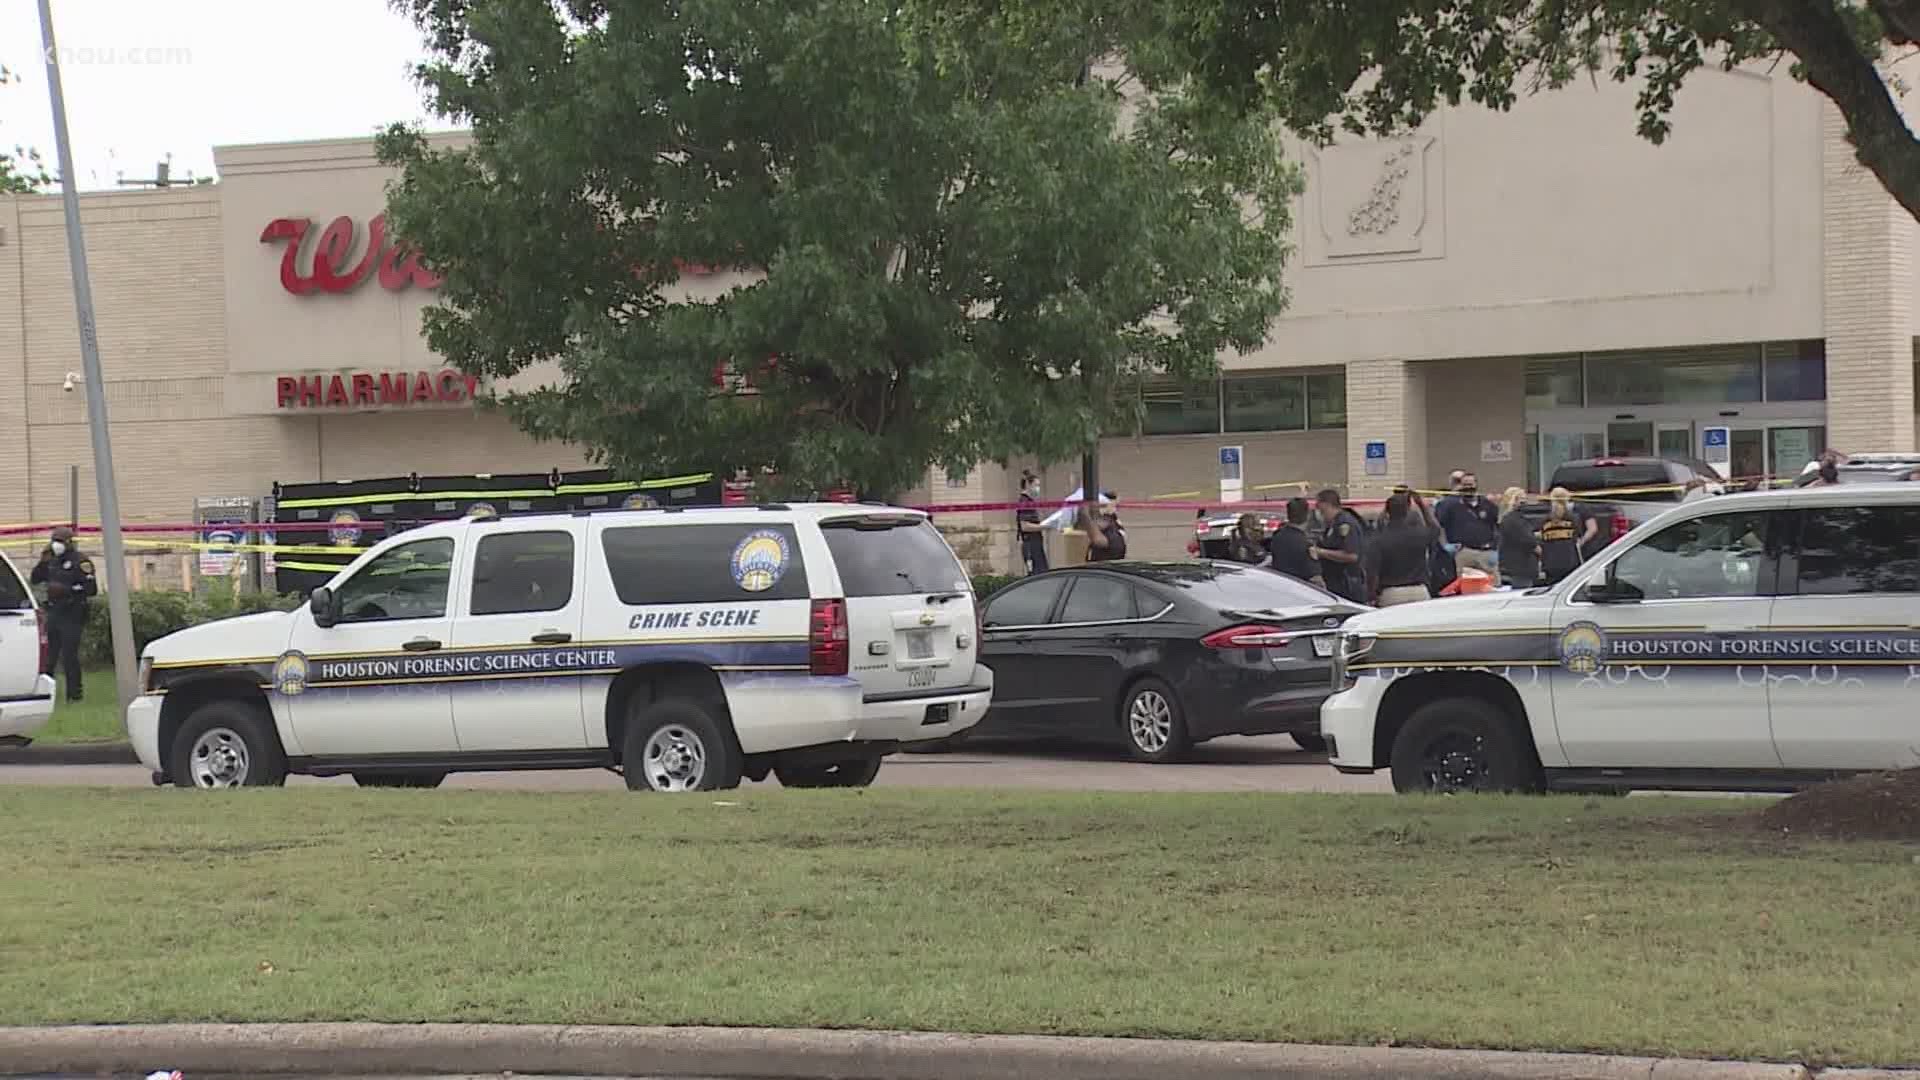 A Houston police officer shot and killed a man who they said stabbed an elderly woman Saturday morning -- the fifth officer-involved shooting in 3 weeks in Houston.